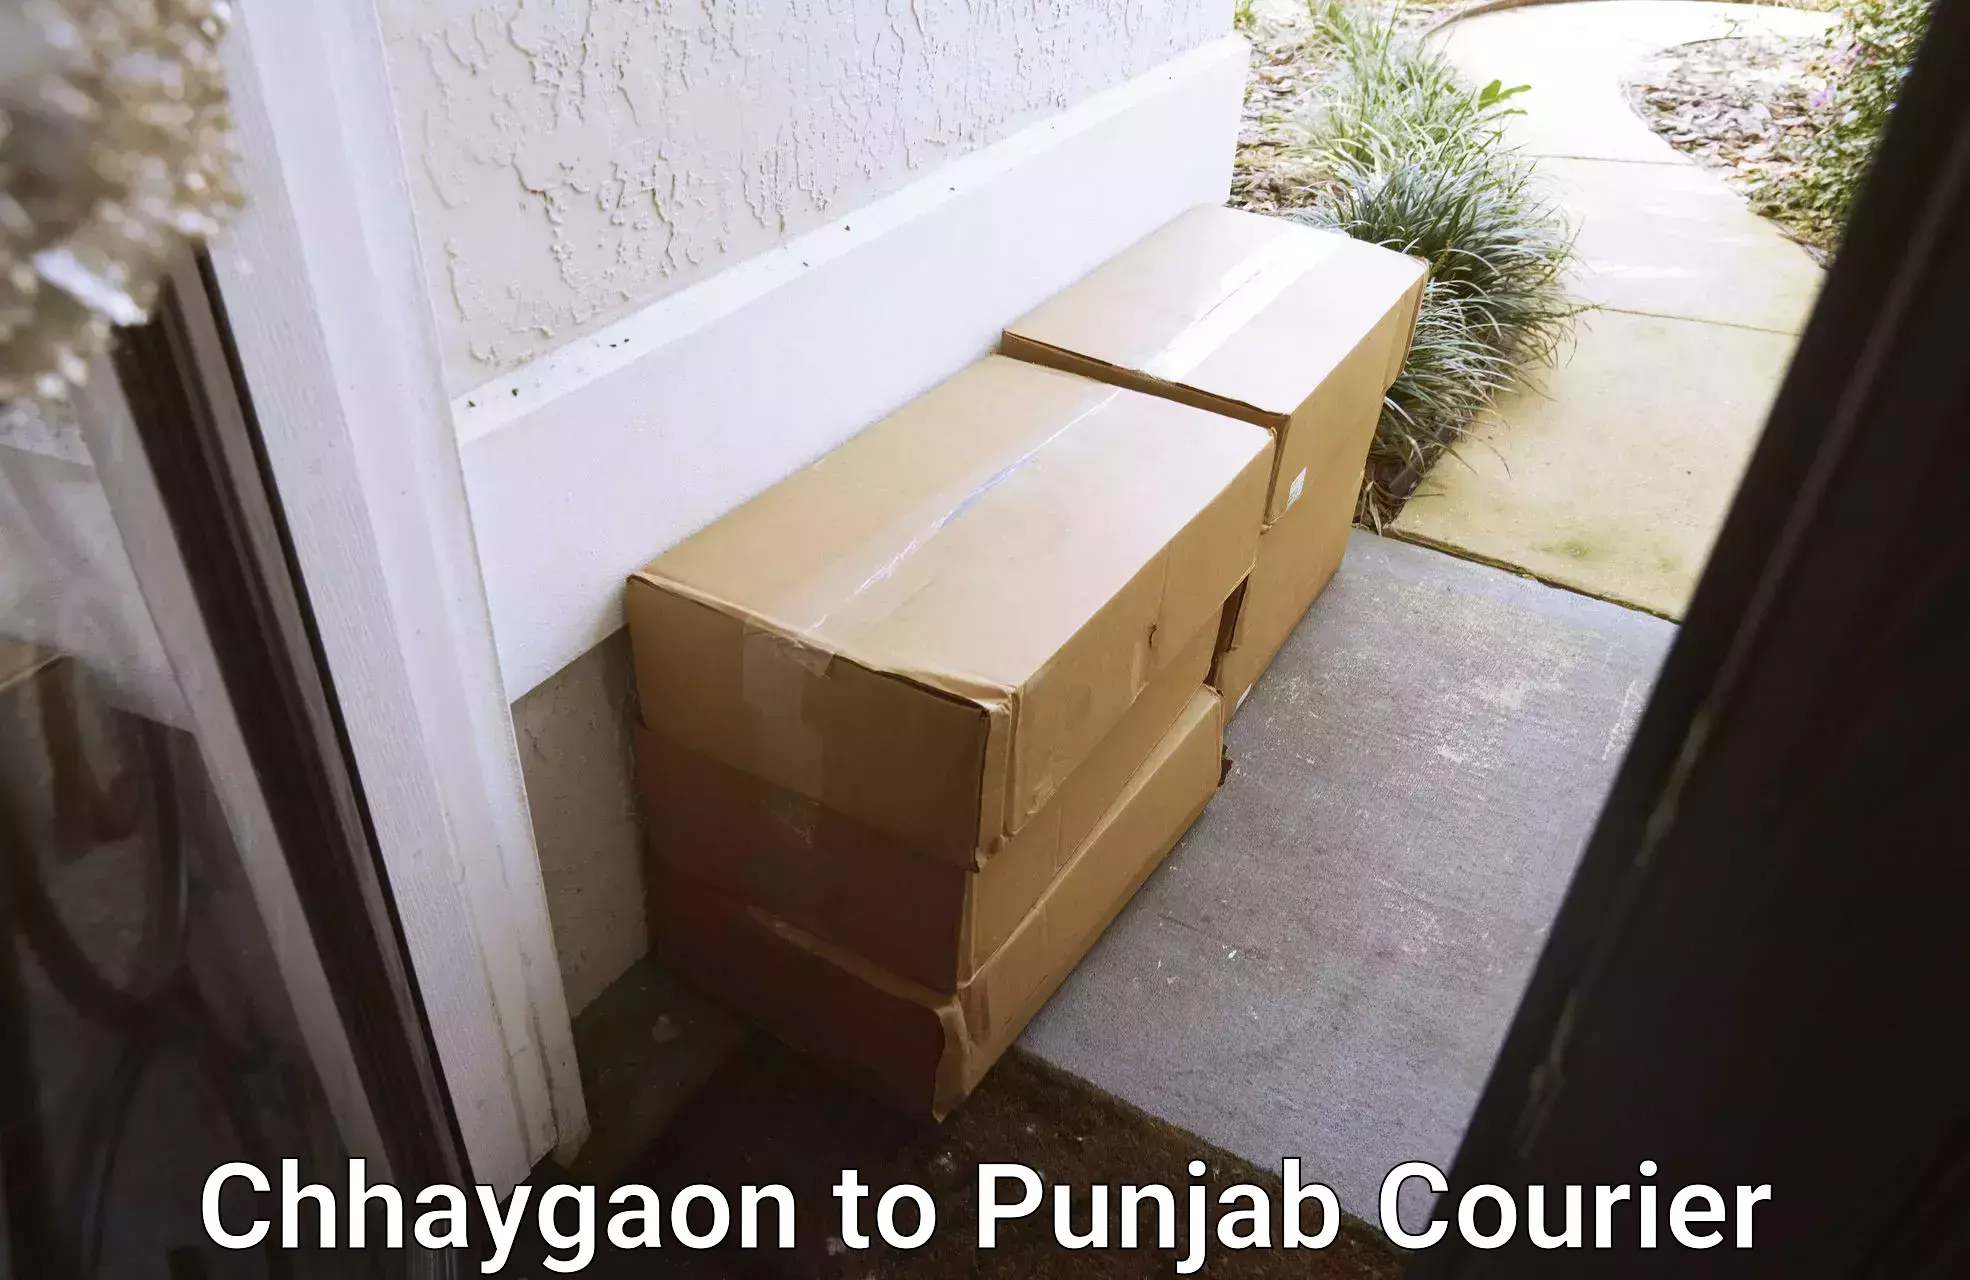 Business delivery service Chhaygaon to Punjab